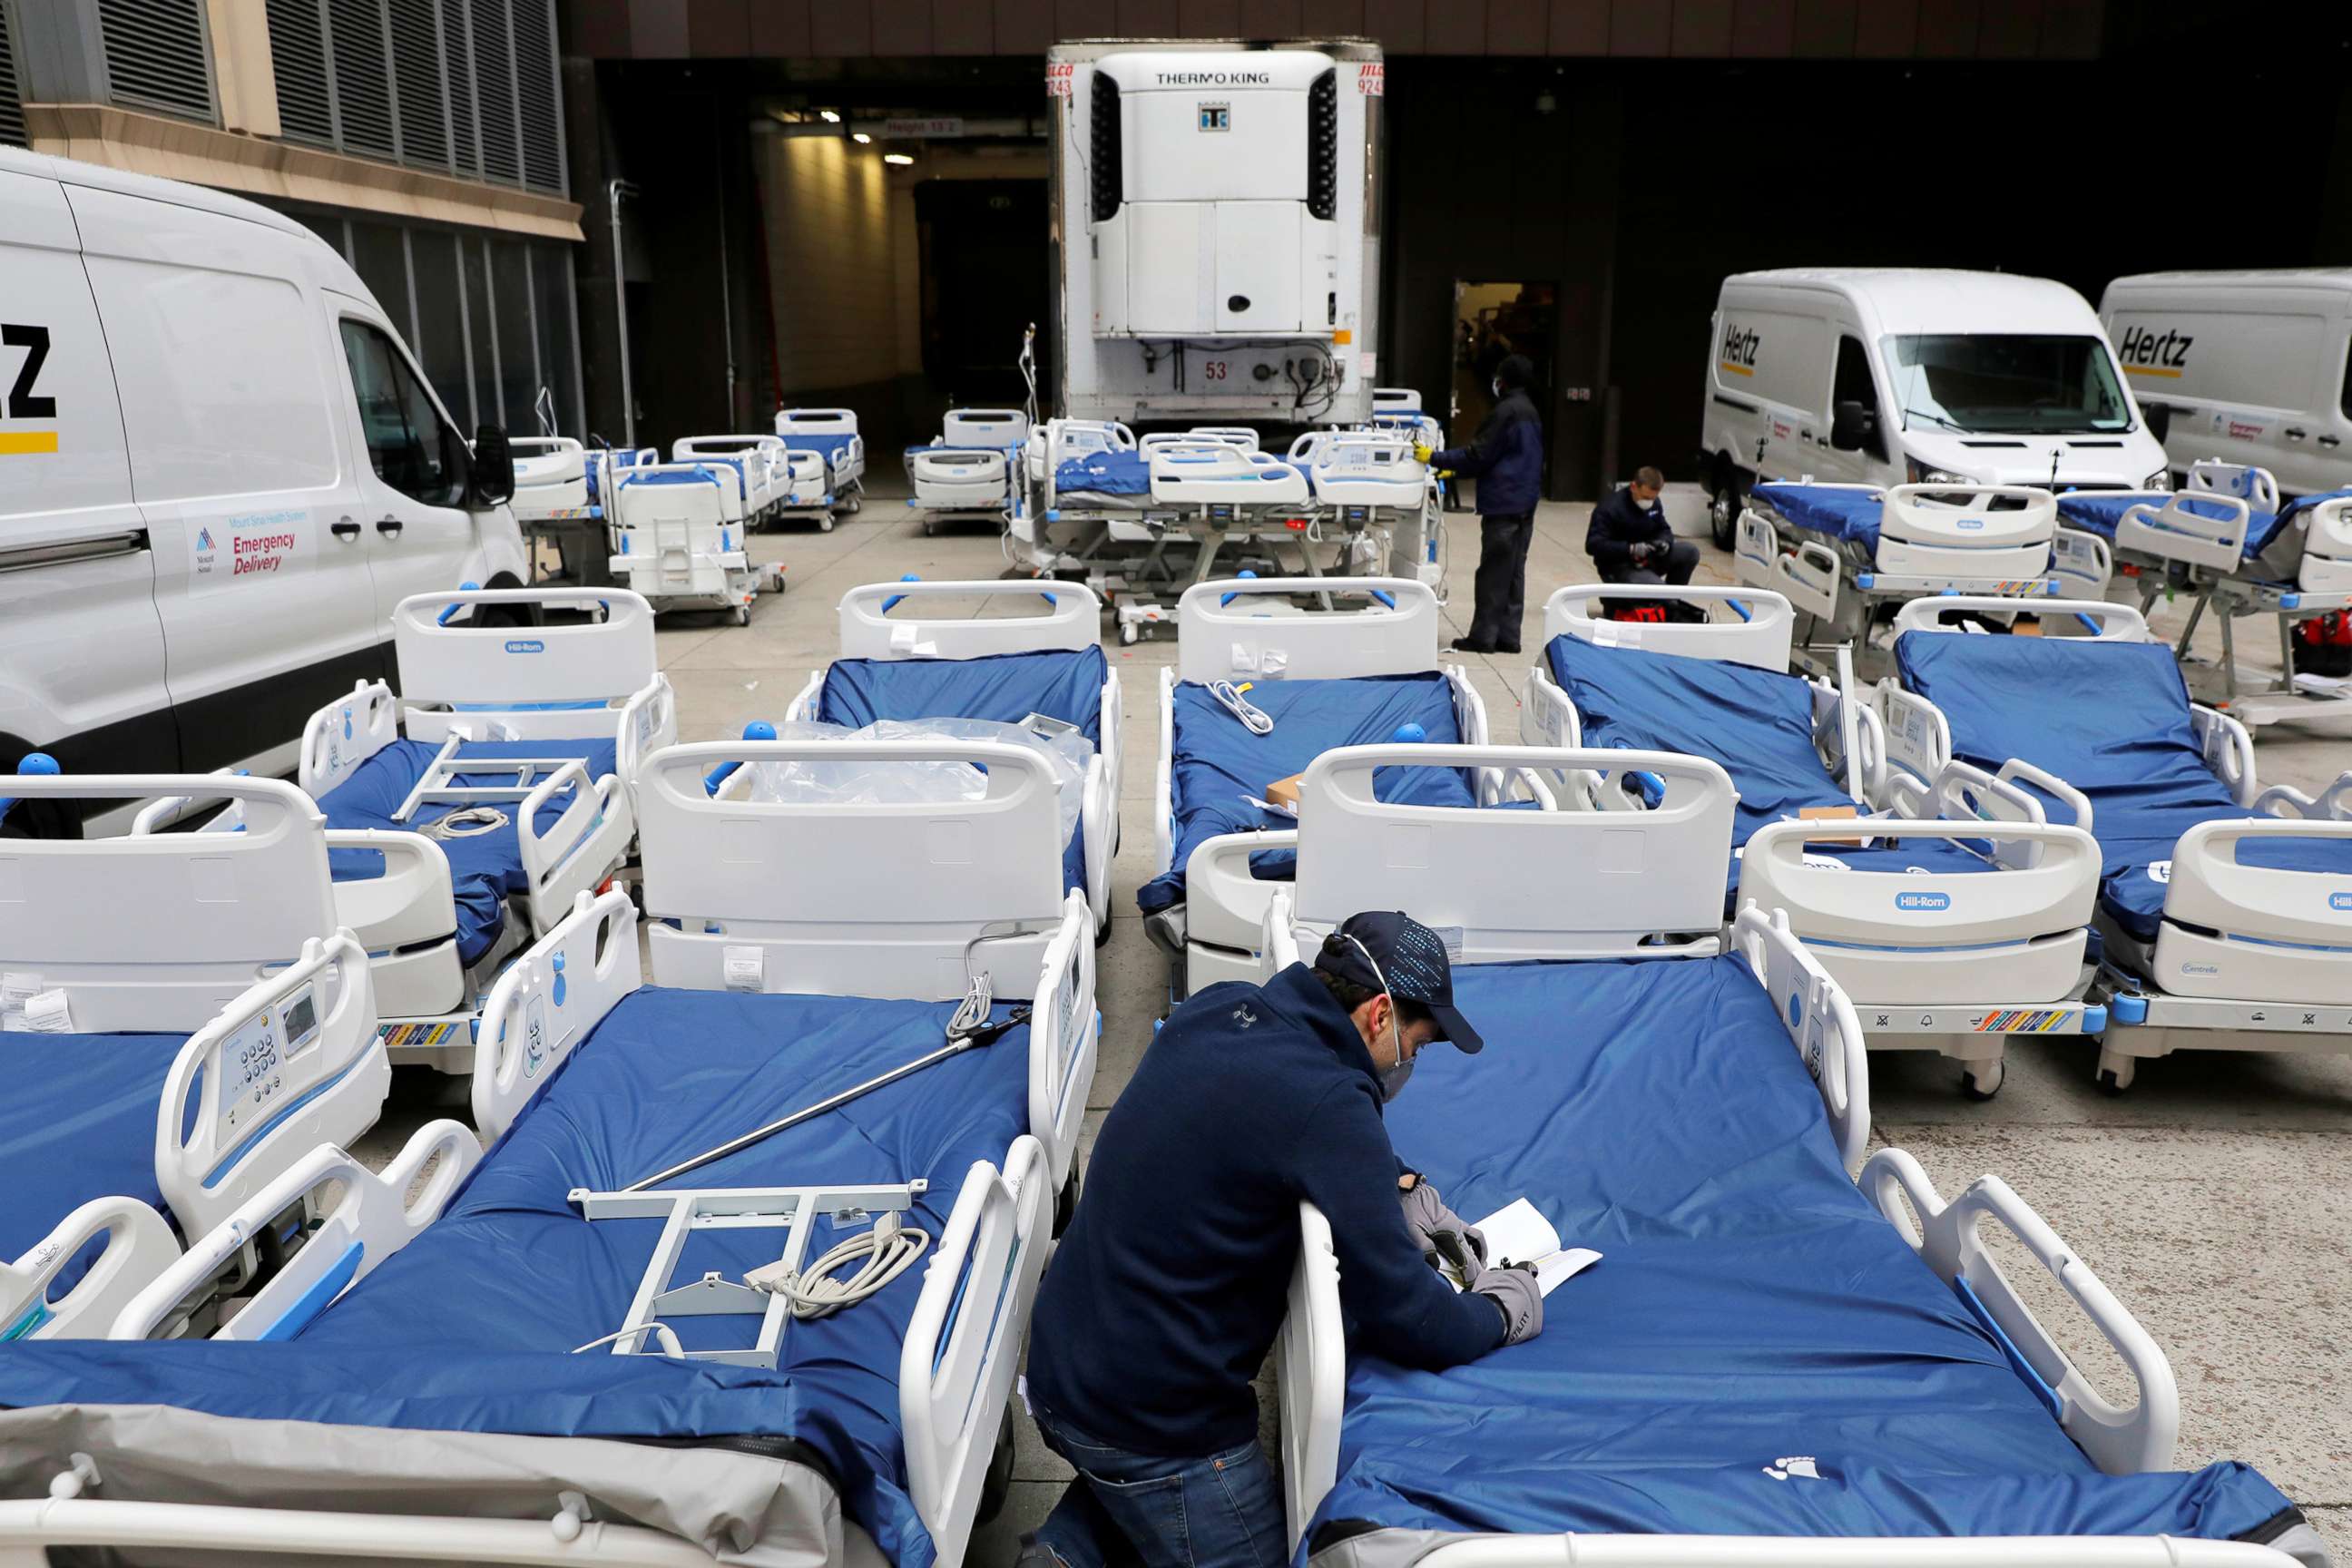 PHOTO: A worker checks a delivery of 64 hospital beds from Hillrom to The Mount Sinai Hospital during the outbreak of the coronavirus disease (COVID-19) in New York City, U.S., March 31, 2020.